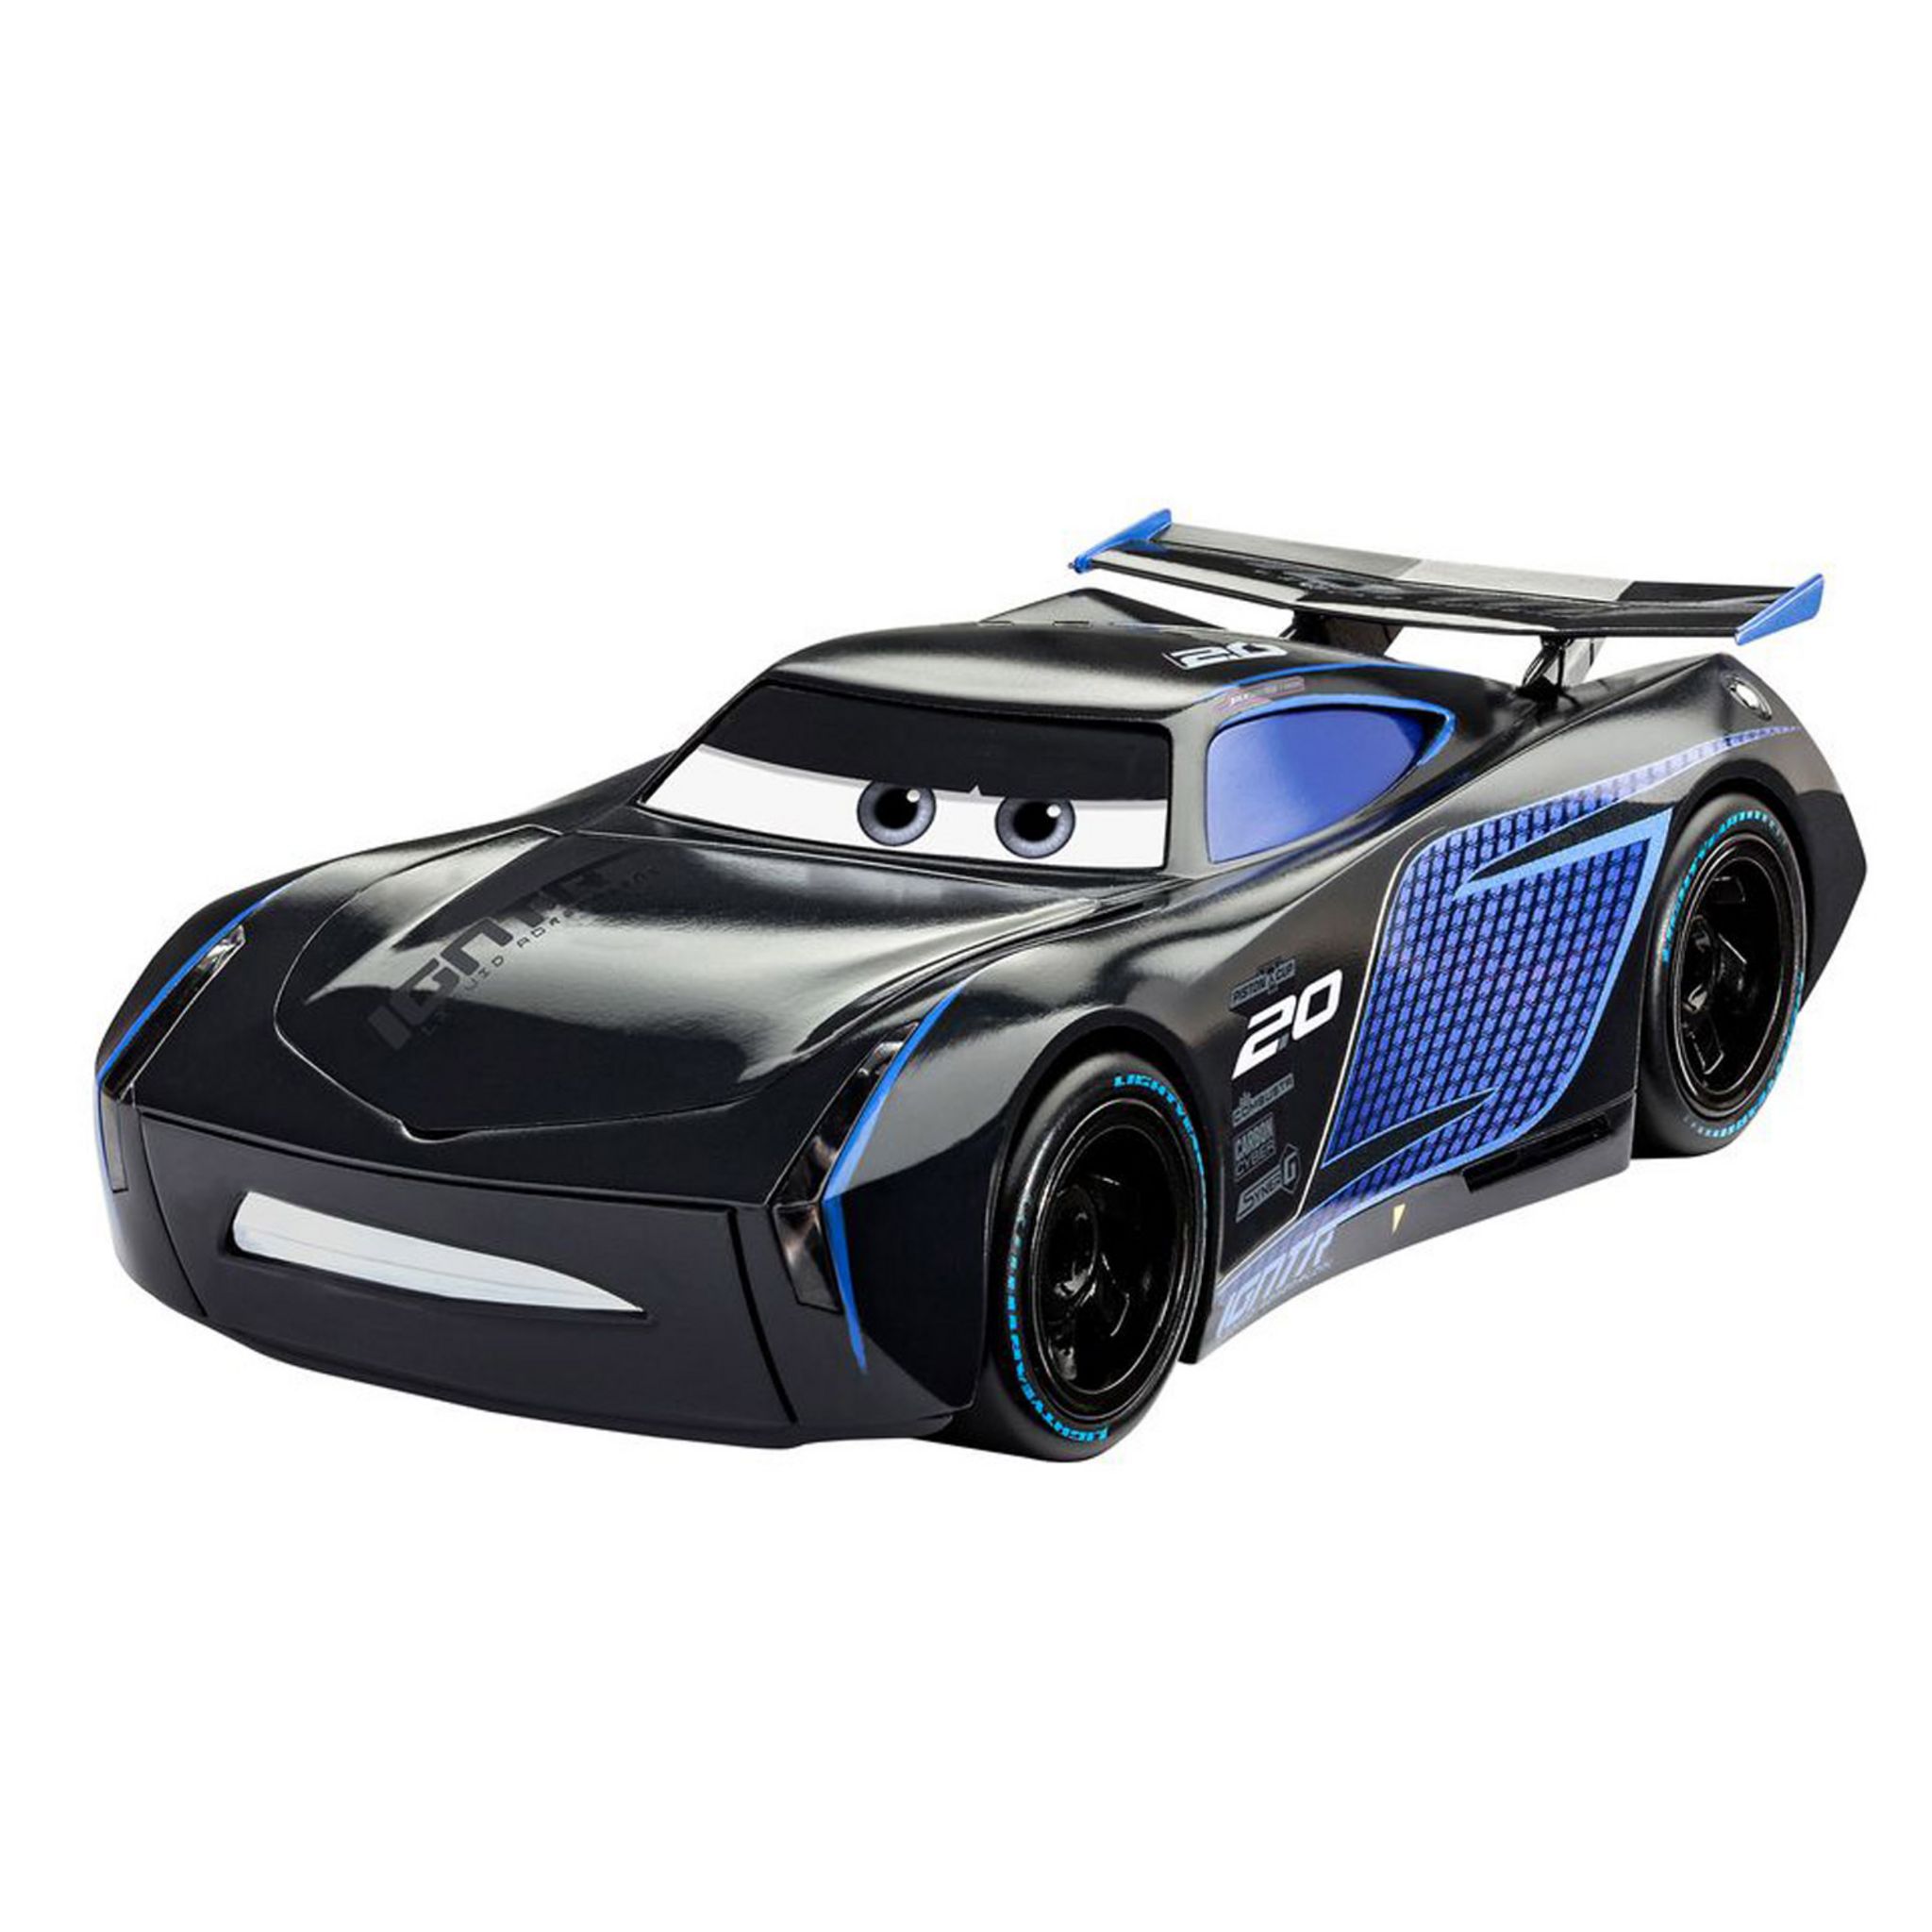 Maquette Jackson Storm sonore et lumineuse - Cars Revell : King